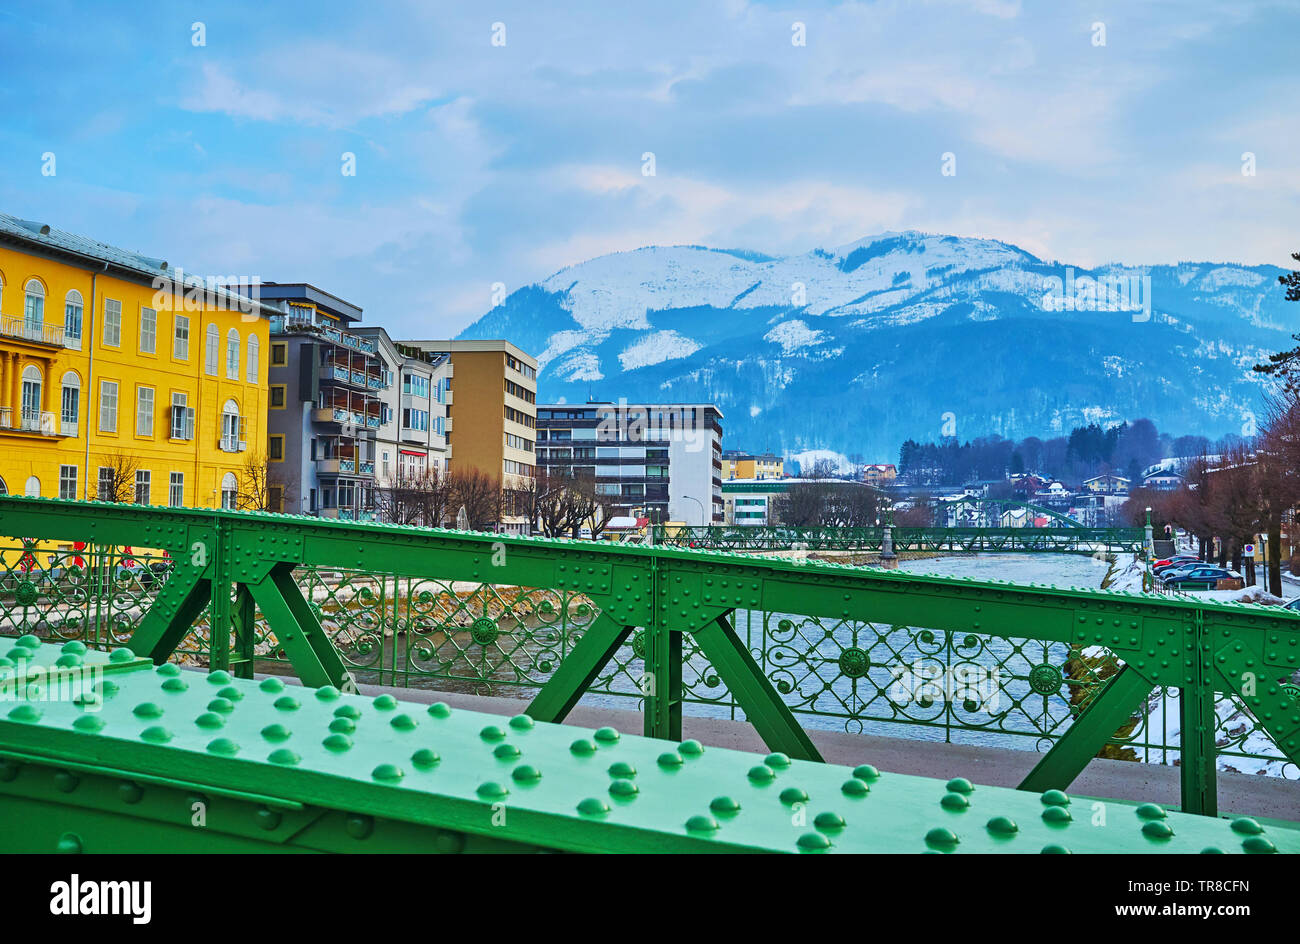 Kaiserin Elizabeth bridge (Elizabethbrucke) overlooks old town with its edifices, parks, Traun river and snowy Alps on the background, Bad Ischl, Salz Stock Photo